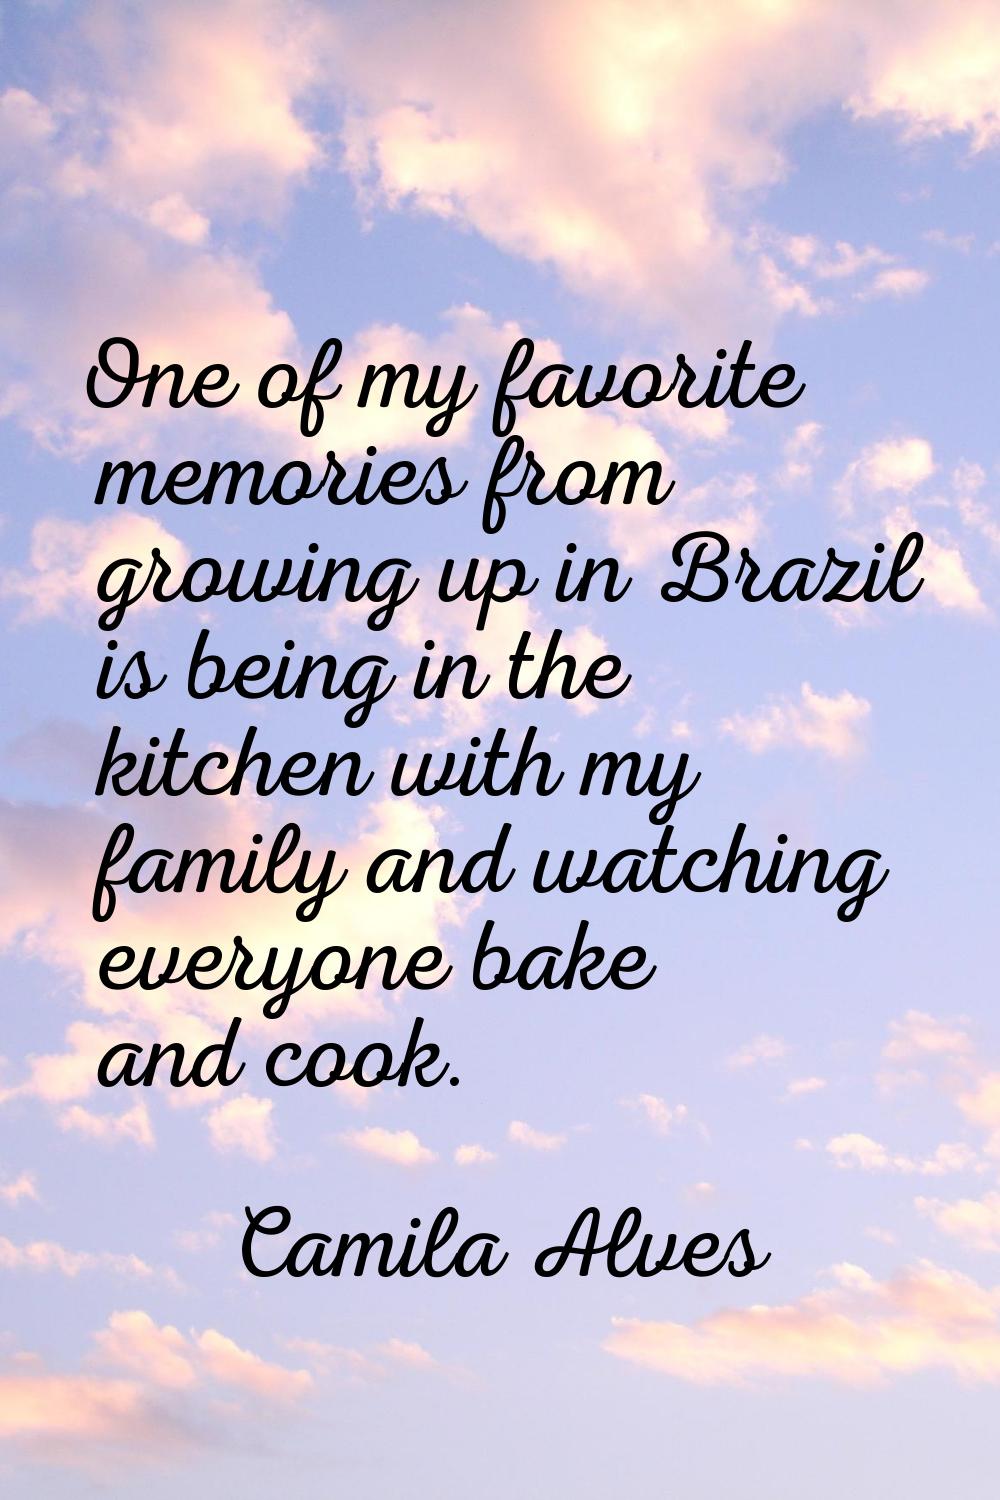 One of my favorite memories from growing up in Brazil is being in the kitchen with my family and wa